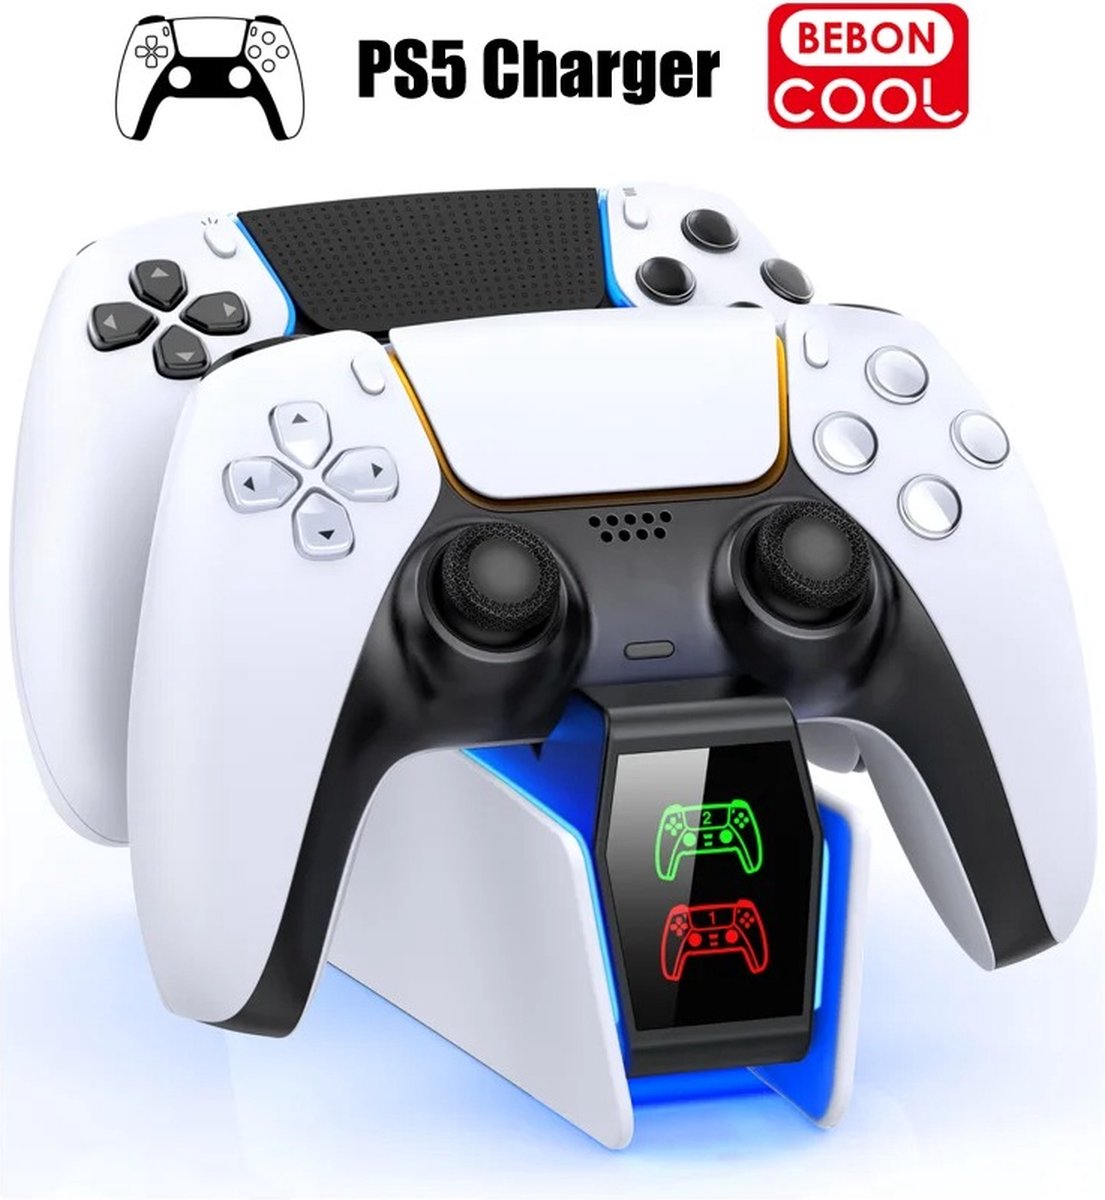 West Laadstation controller - Geschikt voor PS5 - 2 Controllers - LED indicator - Fast charger - Gamen - USB C